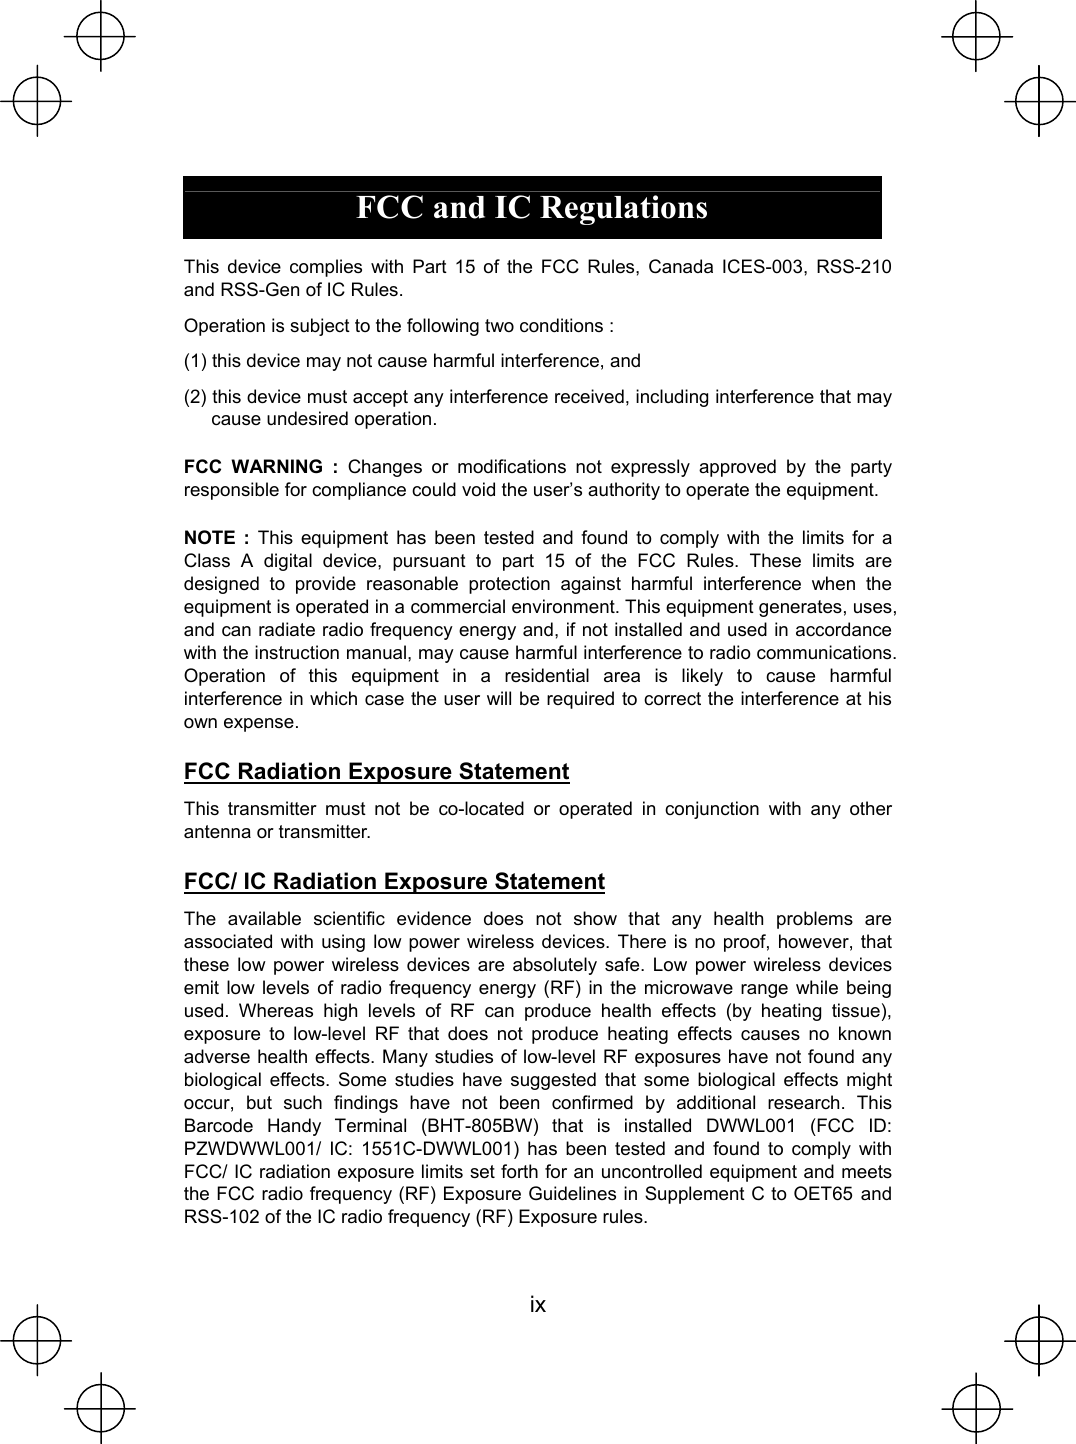  ix  FCC and IC Regulations  This device complies with Part 15 of the FCC Rules, Canada ICES-003, RSS-210 and RSS-Gen of IC Rules. Operation is subject to the following two conditions : (1) this device may not cause harmful interference, and (2) this device must accept any interference received, including interference that may cause undesired operation. FCC WARNING : Changes or modifications not expressly approved by the party responsible for compliance could void the user’s authority to operate the equipment. NOTE : This equipment has been tested and found to comply with the limits for a Class A digital device, pursuant to part 15 of the FCC Rules. These limits are designed to provide reasonable protection against harmful interference when the equipment is operated in a commercial environment. This equipment generates, uses, and can radiate radio frequency energy and, if not installed and used in accordance with the instruction manual, may cause harmful interference to radio communications. Operation of this equipment in a residential area is likely to cause harmful interference in which case the user will be required to correct the interference at his own expense. FCC Radiation Exposure Statement This transmitter must not be co-located or operated in conjunction with any other antenna or transmitter. FCC/ IC Radiation Exposure Statement The available scientific evidence does not show that any health problems are associated with using low power wireless devices. There is no proof, however, that these low power wireless devices are absolutely safe. Low power wireless devices emit low levels of radio frequency energy (RF) in the microwave range while being used. Whereas high levels of RF can produce health effects (by heating tissue), exposure to low-level RF that does not produce heating effects causes no known adverse health effects. Many studies of low-level RF exposures have not found any biological effects. Some studies have suggested that some biological effects might occur, but such findings have not been confirmed by additional research. This Barcode Handy Terminal (BHT-805BW) that is installed DWWL001 (FCC ID: PZWDWWL001/ IC: 1551C-DWWL001) has been tested and found to comply with FCC/ IC radiation exposure limits set forth for an uncontrolled equipment and meets the FCC radio frequency (RF) Exposure Guidelines in Supplement C to OET65㩷and RSS-102 of the IC radio frequency (RF) Exposure rules.     